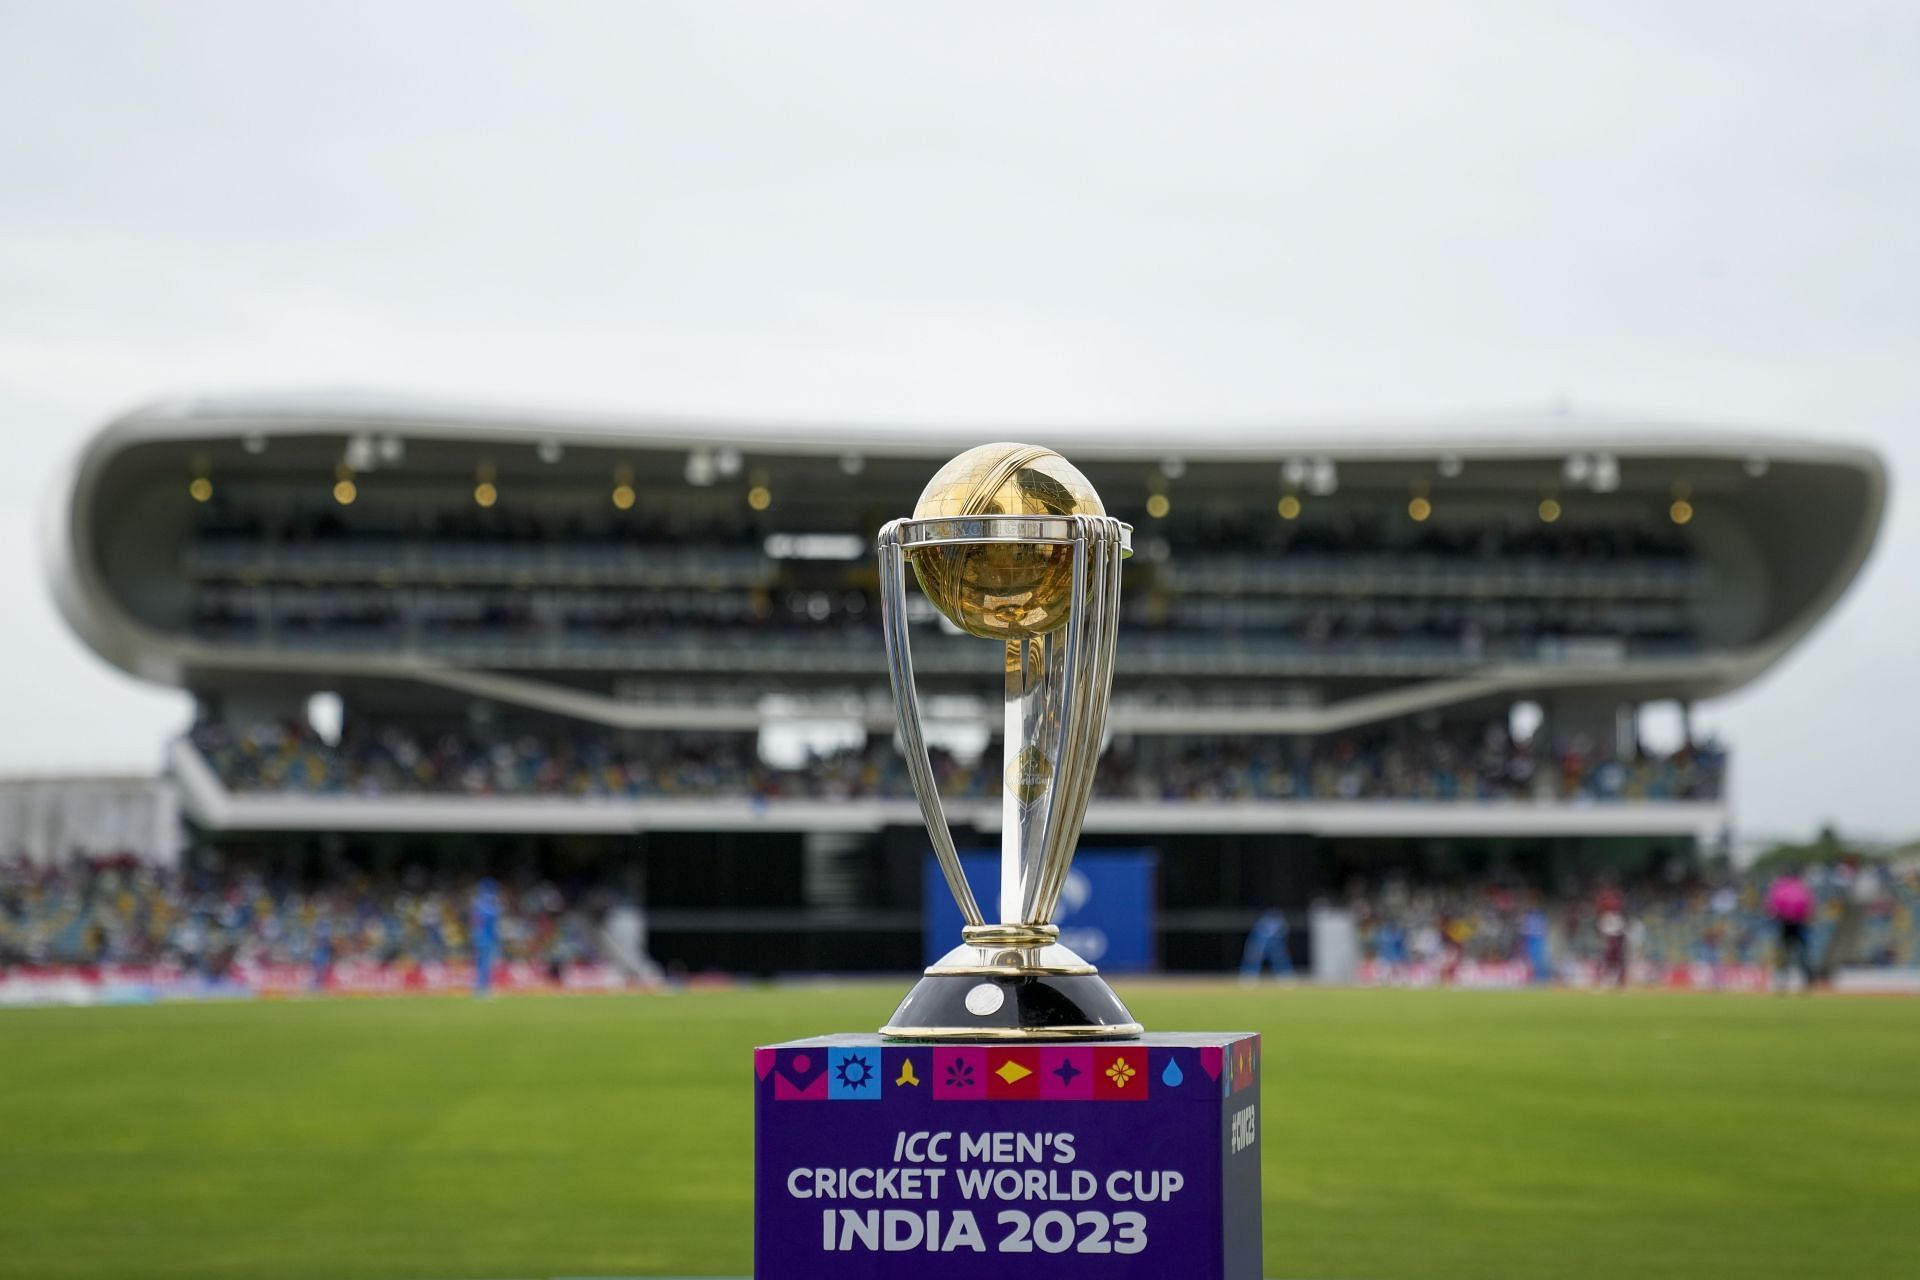 The trophy that 10 teams will be competing for. (Pic: ICC)